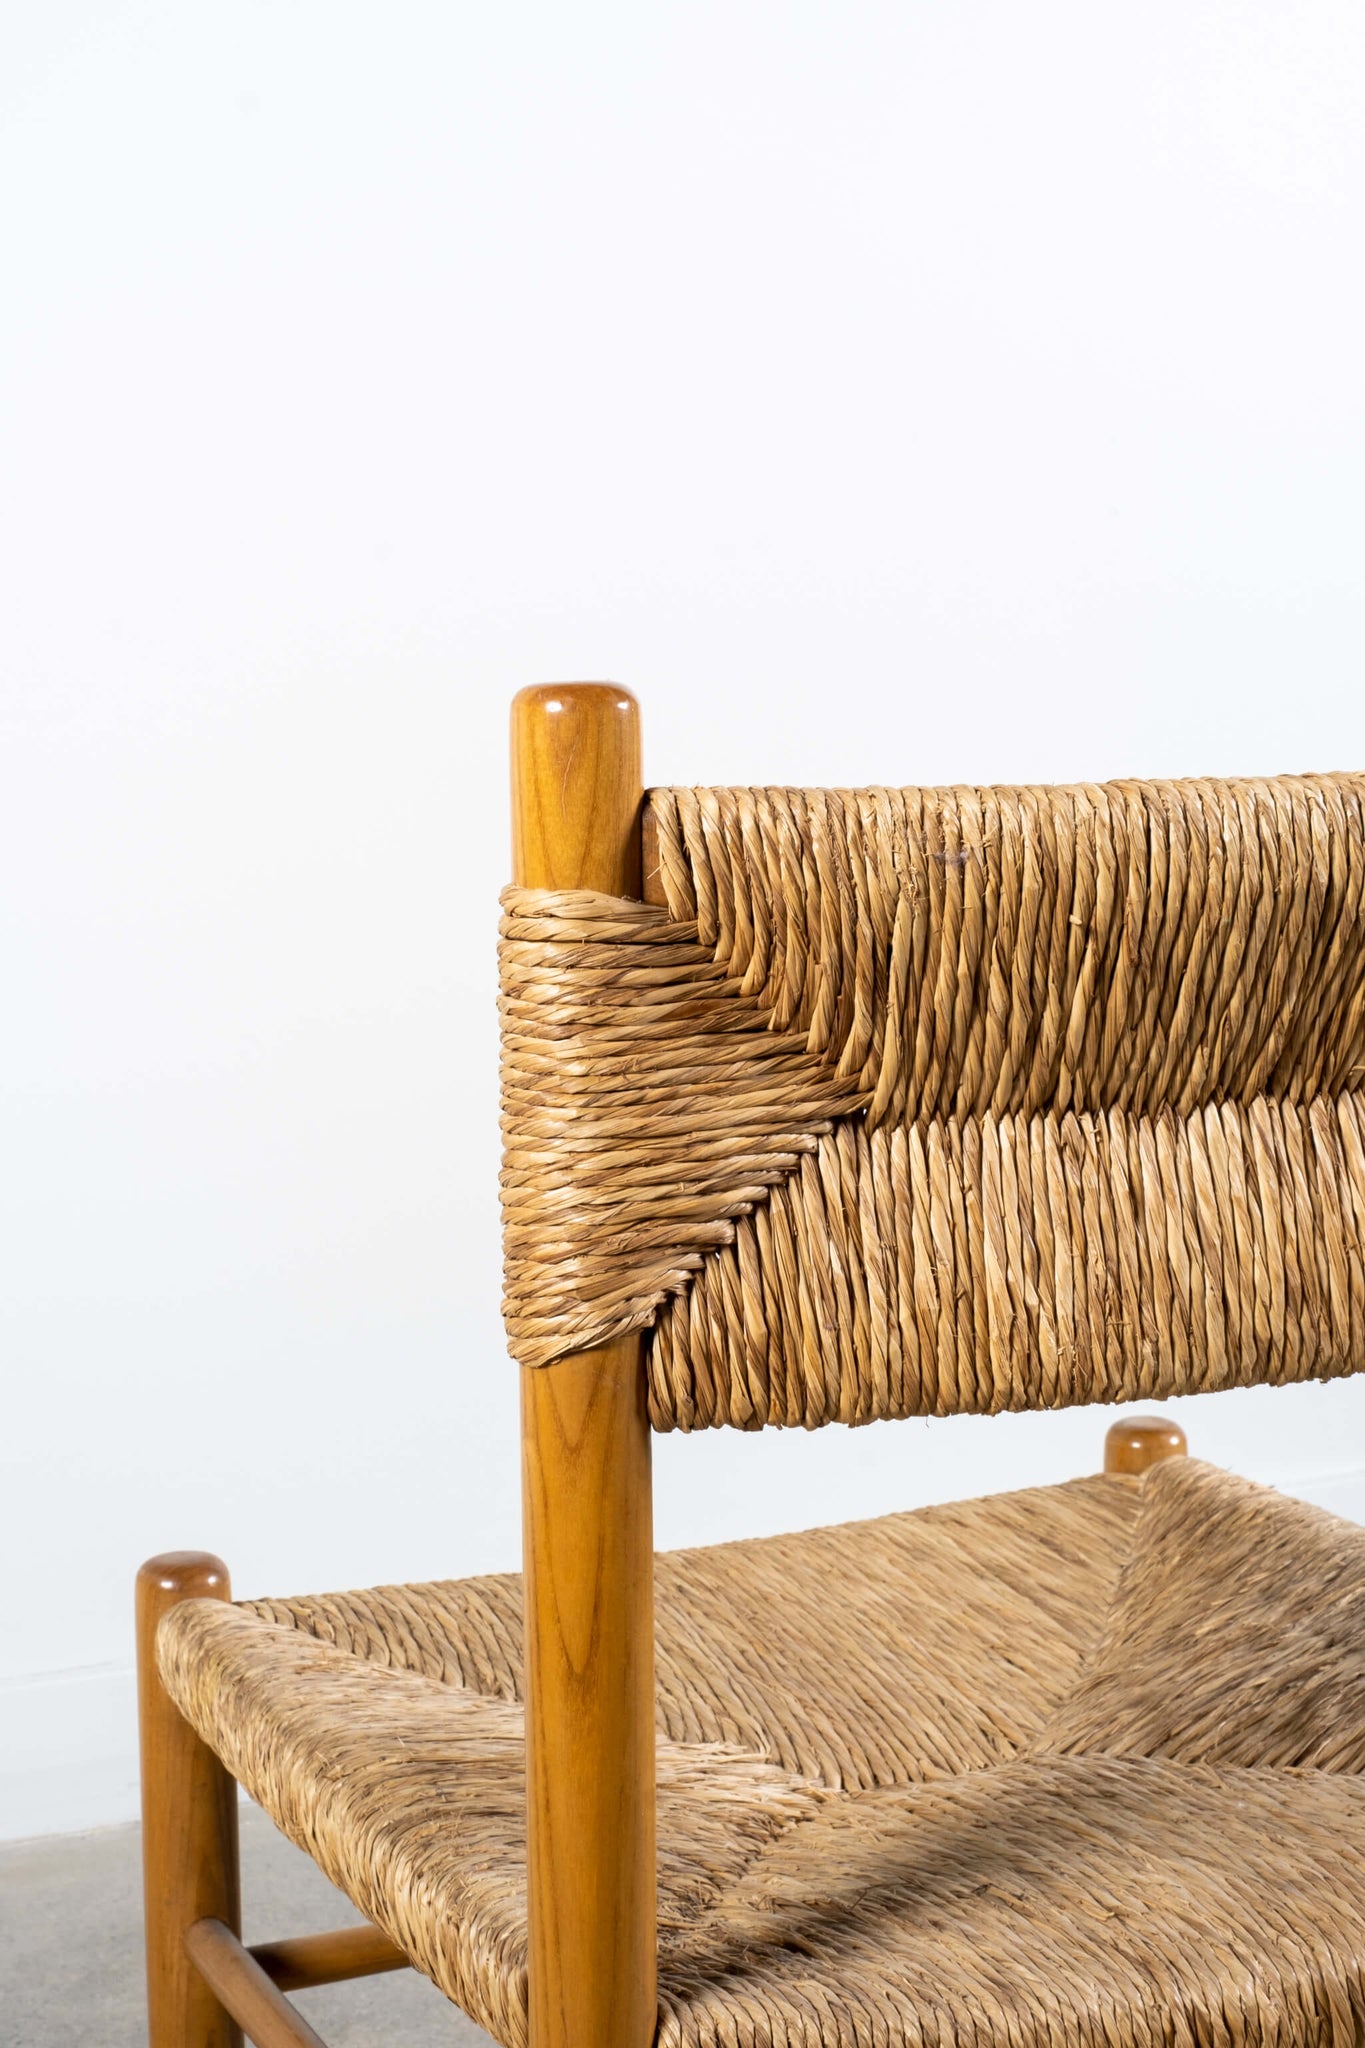 Rare Vintage Dordogne French Dining Chairs with Wood Frame & Woven Jute Seat, back detail view